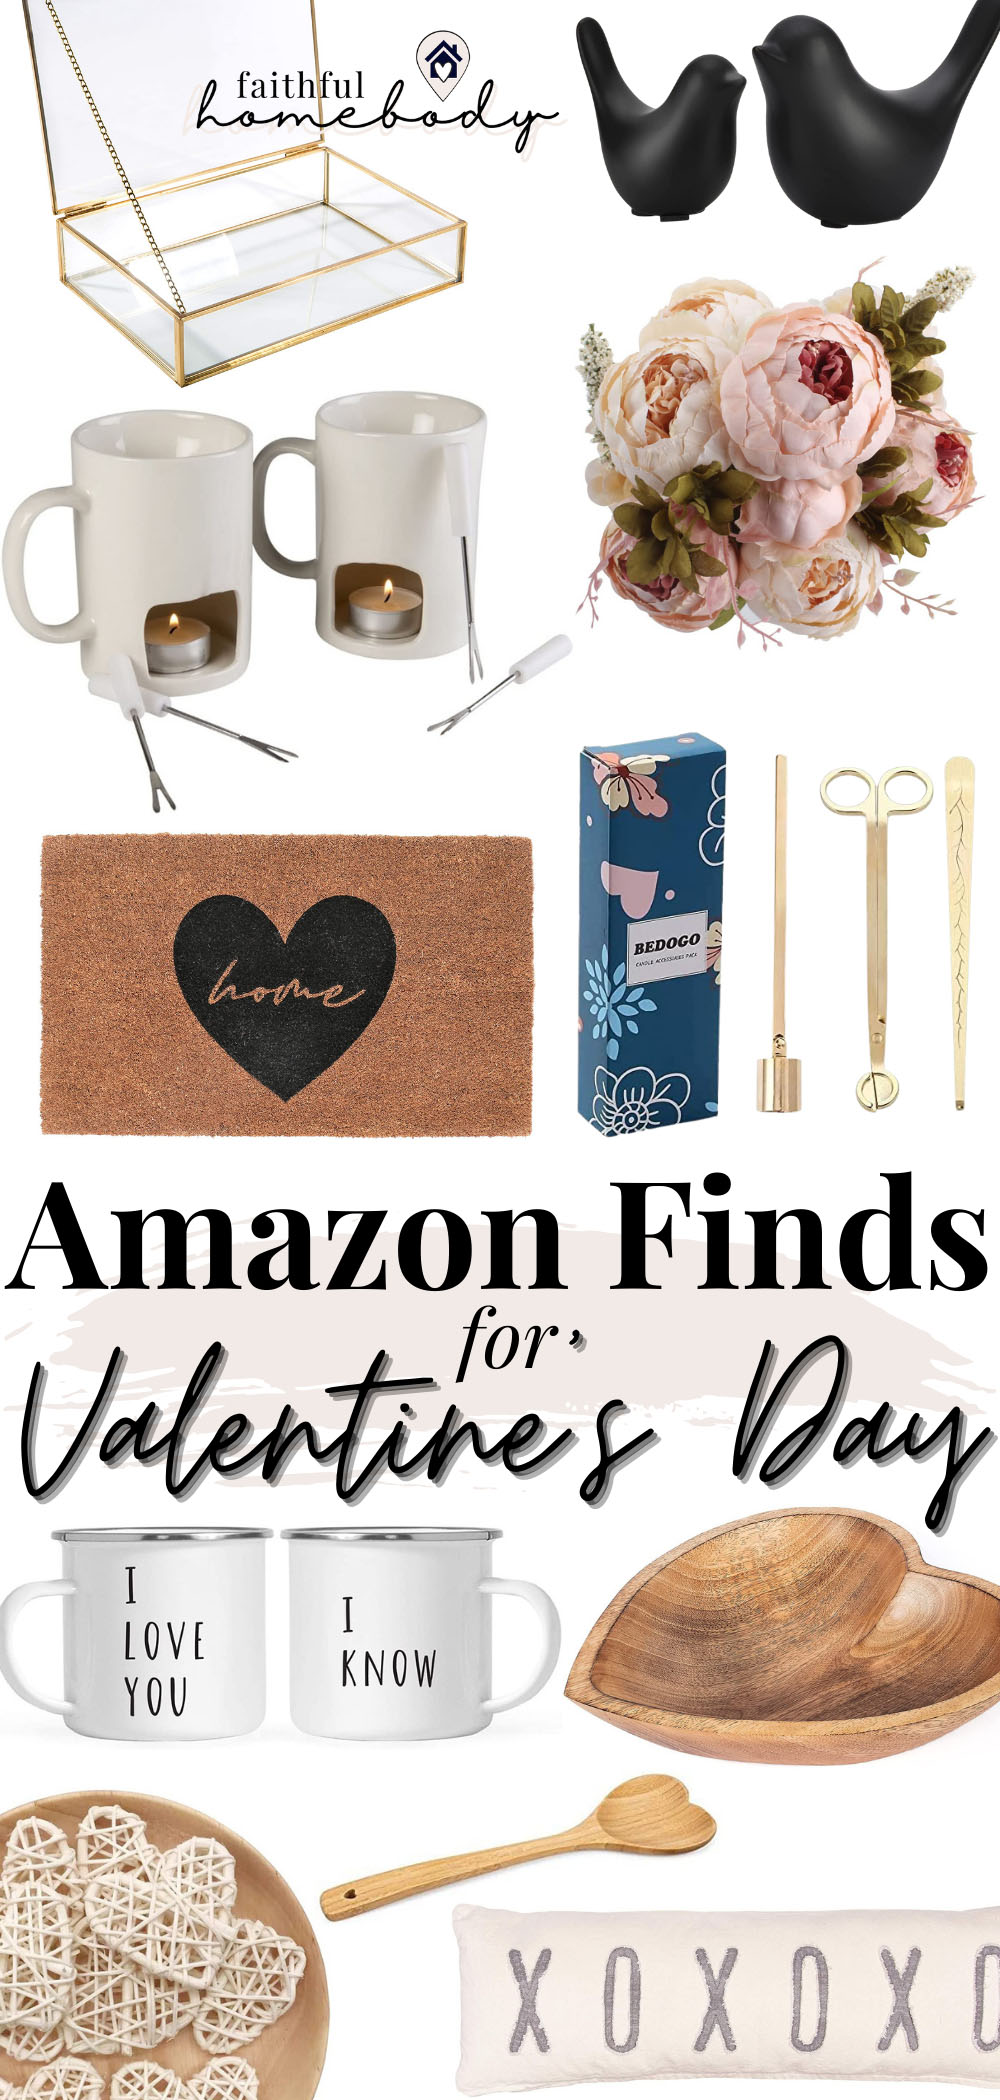 Pinterest 14 Amazon Finds for Valentine's Day